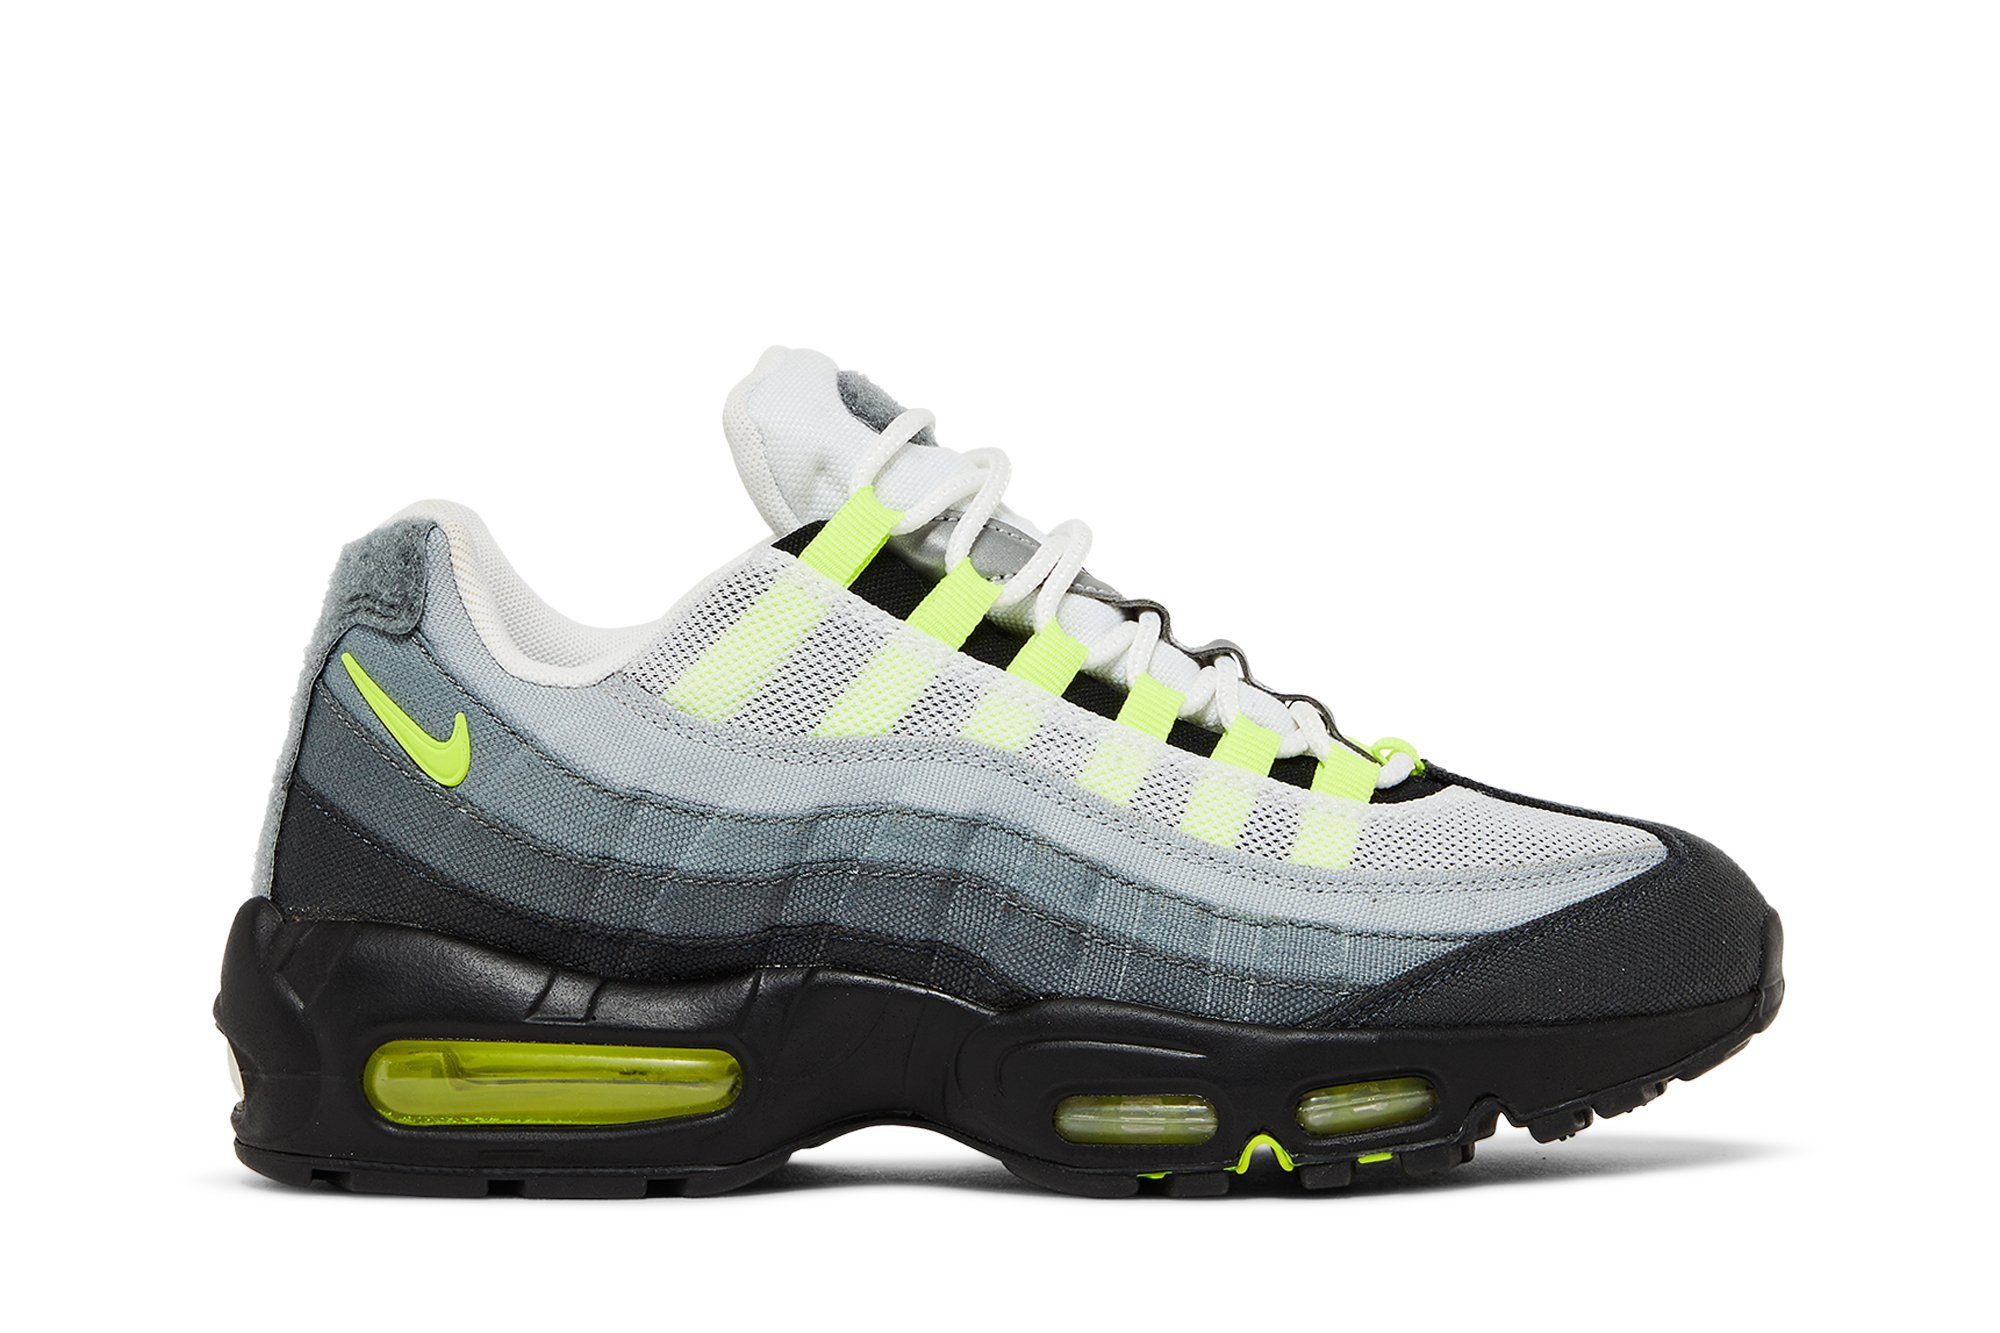 Buy Air Max 95 SP 'Neon Patch' - 747137 170 | GOAT